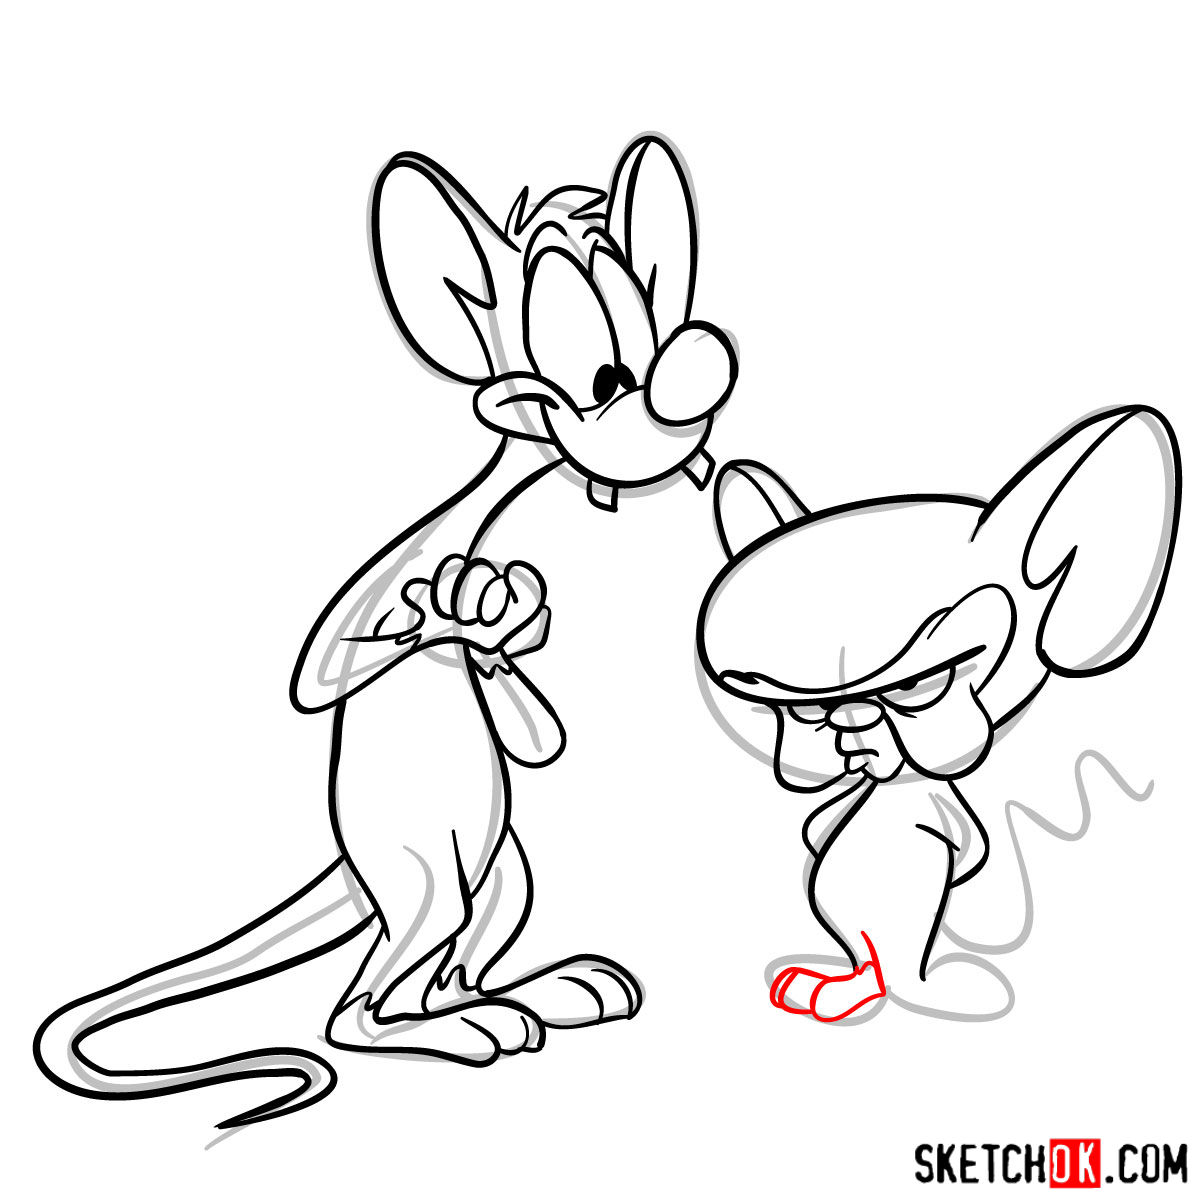 How to draw Pinky and the Brain together - step 13